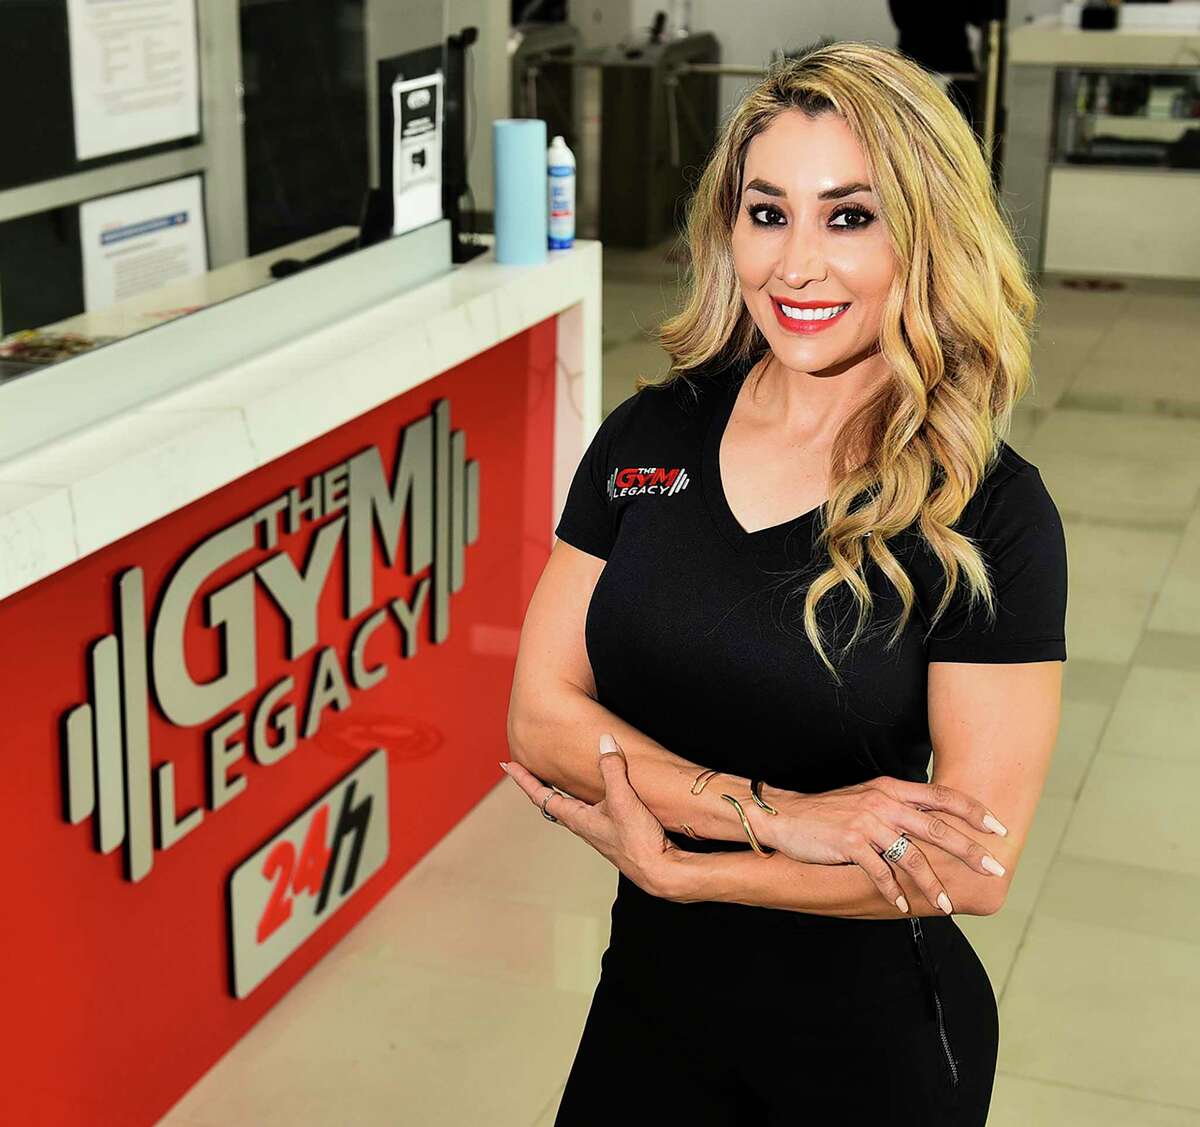 Former TAMIU volleyball player Mayra Ferrara utilized her passion for the sport in developing a career running The Gym Legacy.